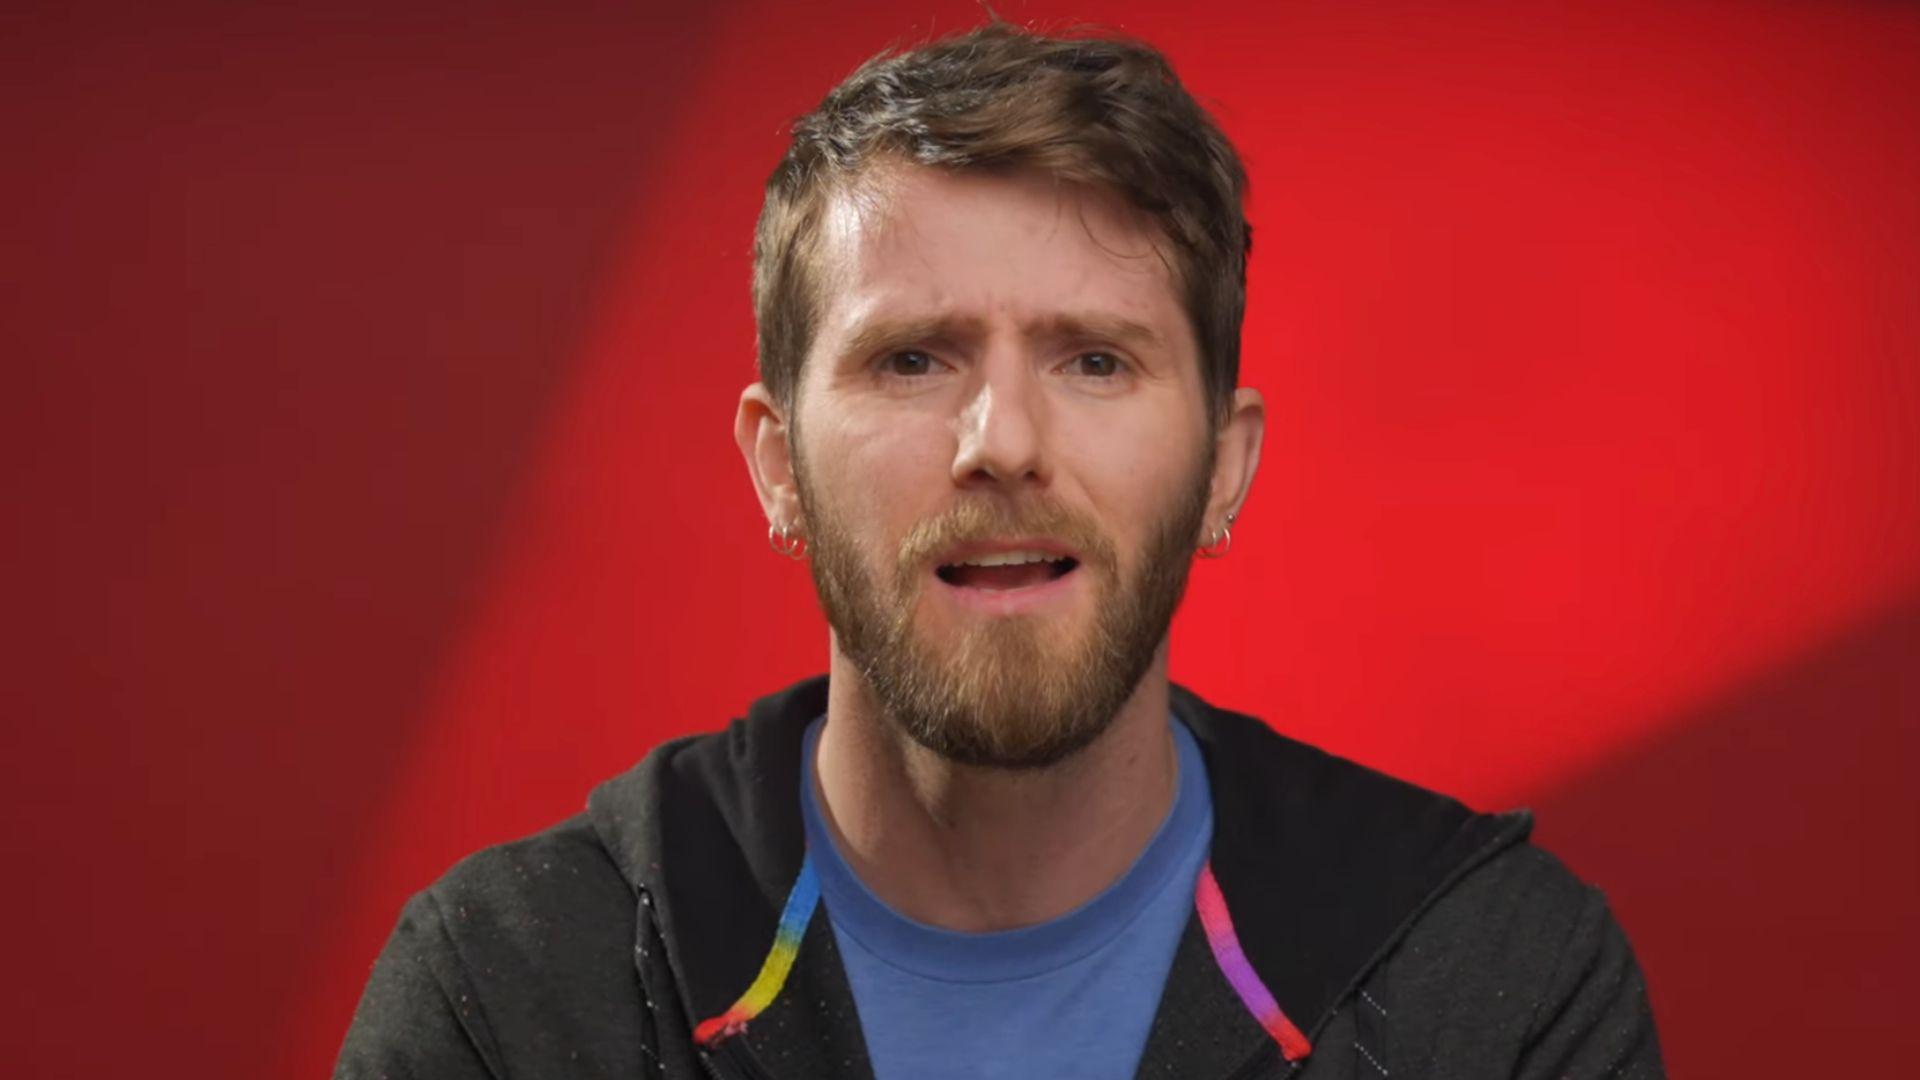 LinusTechTips talking to camera in front of red background